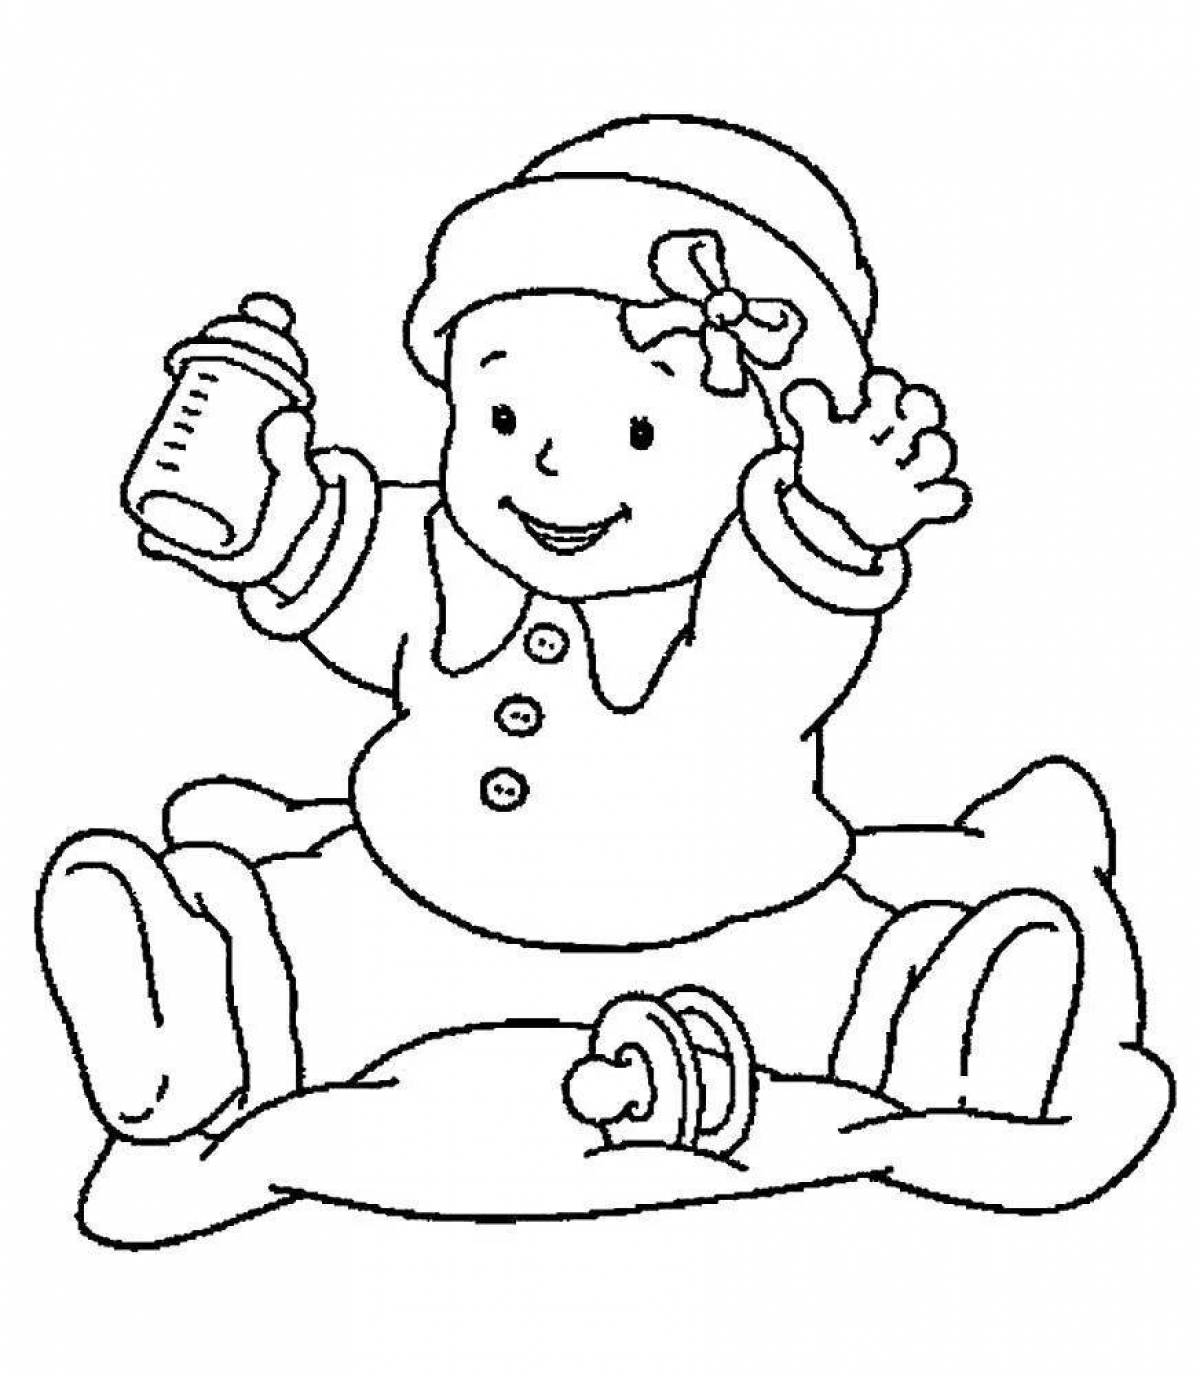 Coloring page gorgeous dolly